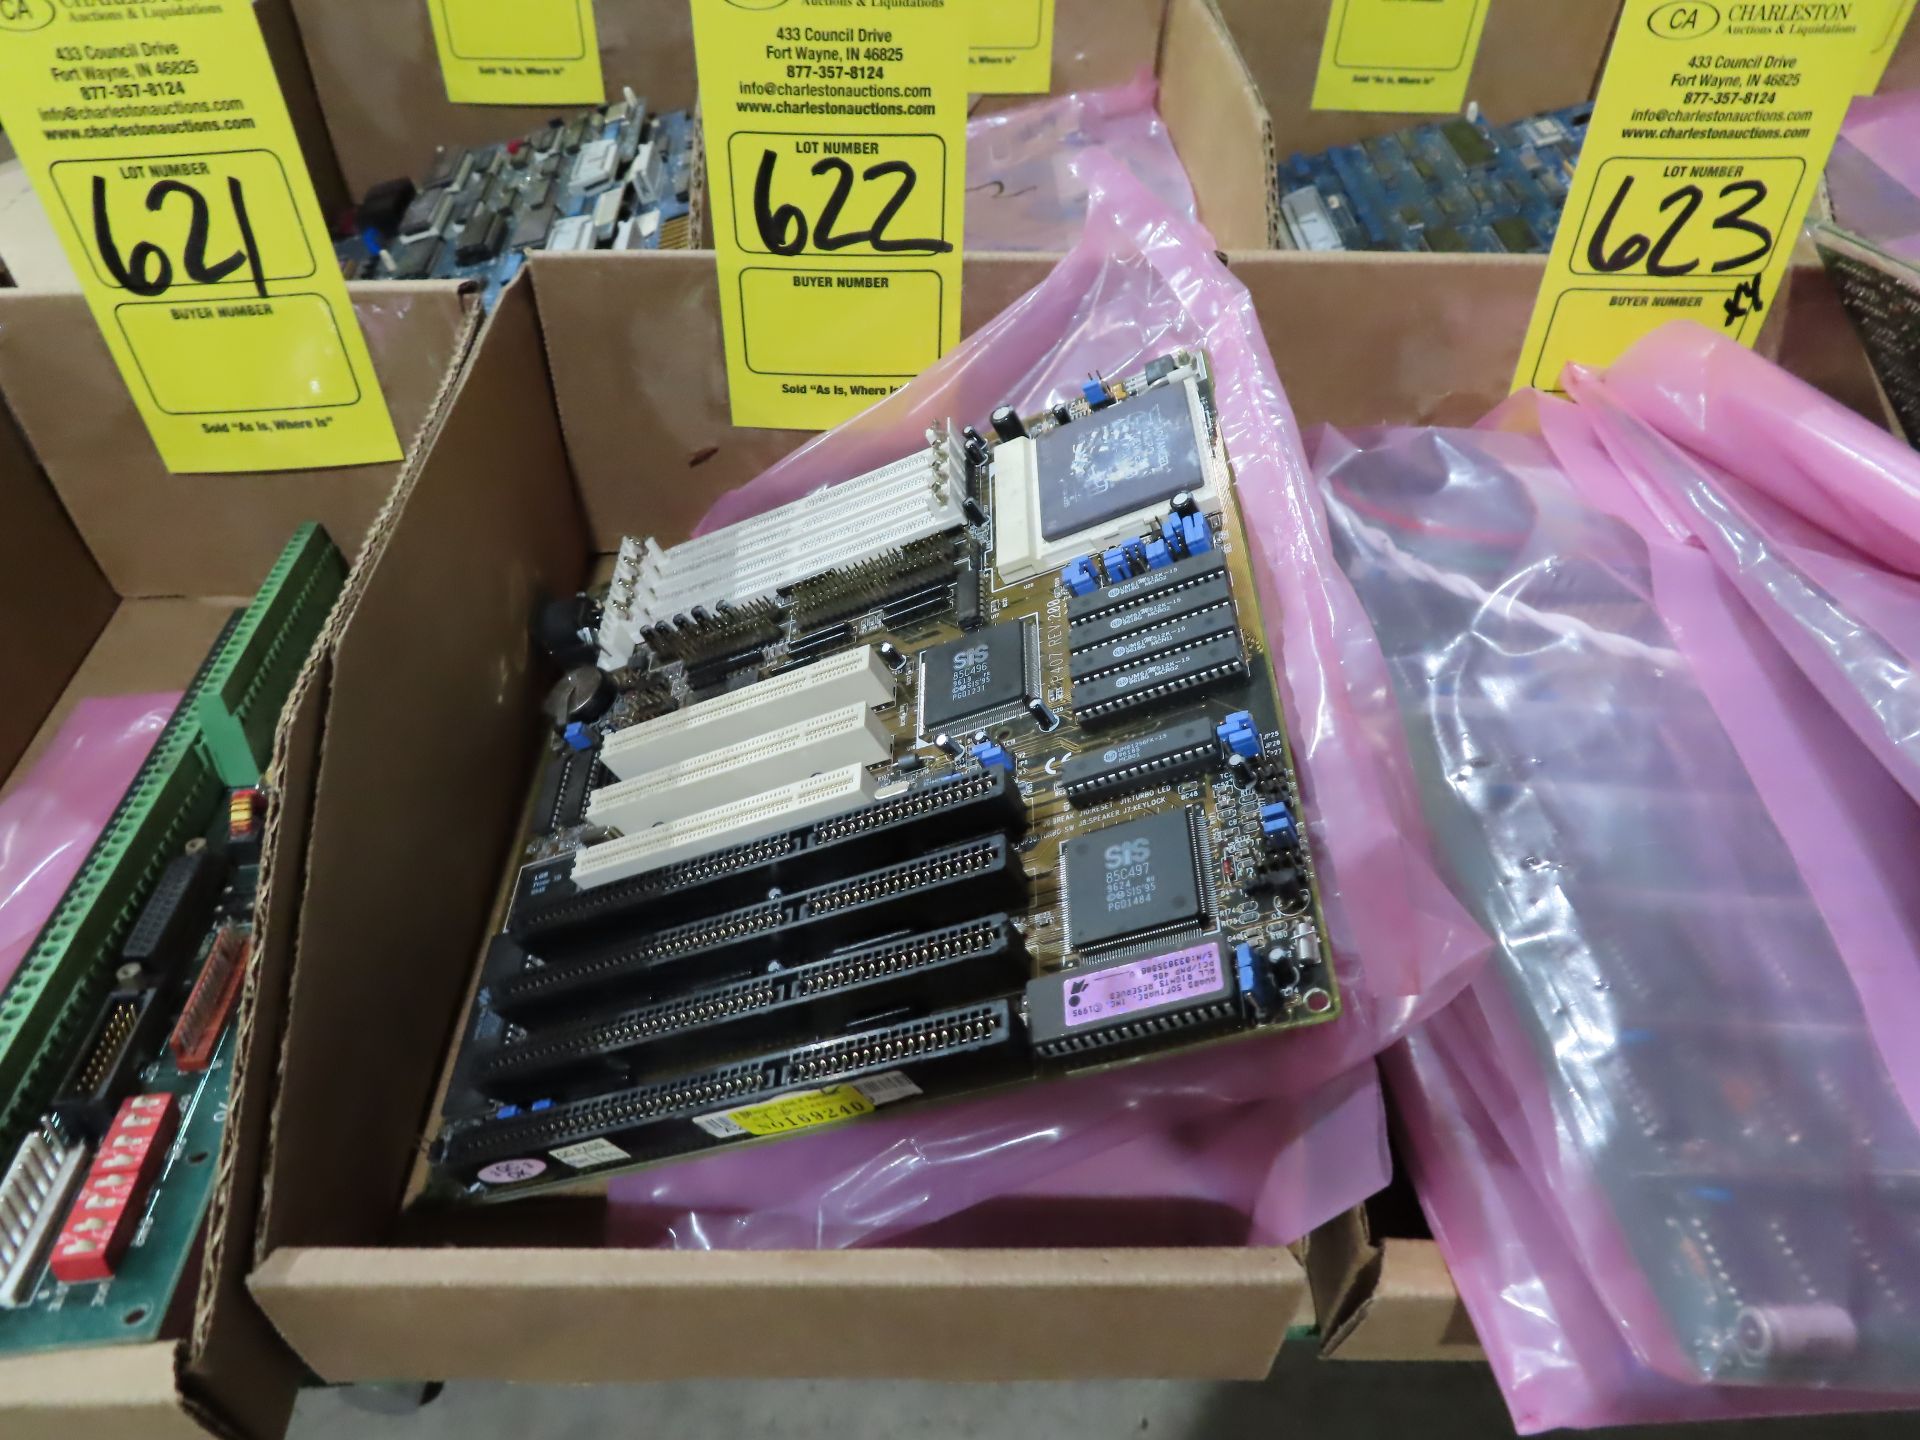 BEK P407 motherboard, as always, with Brolyn LLC auctions, all lots can be picked up from auction